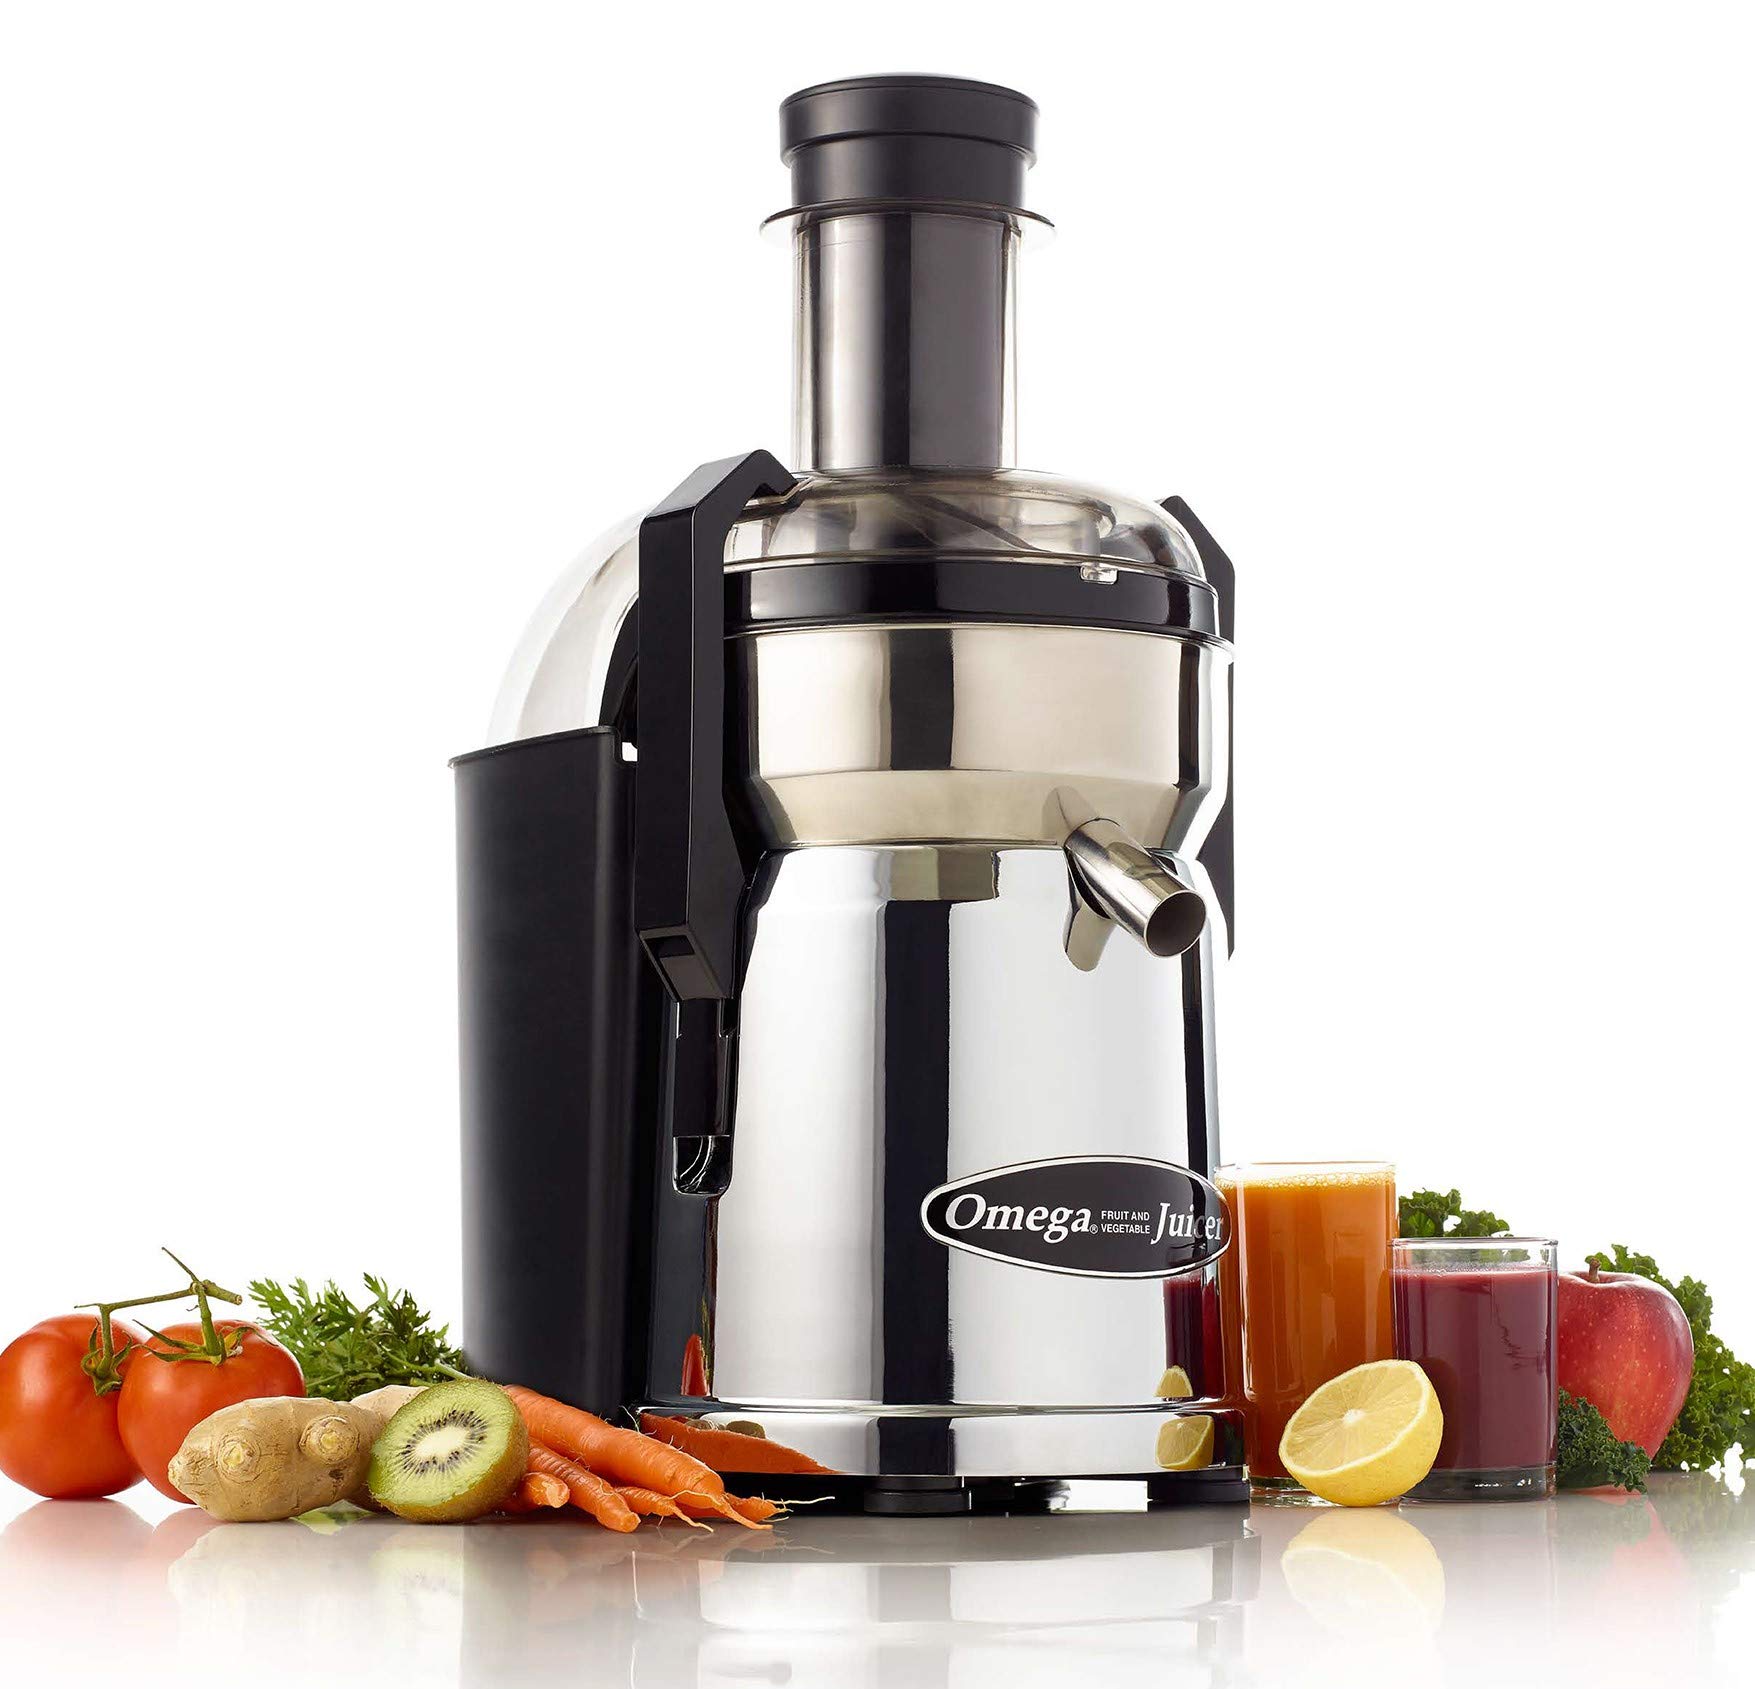 How To Use The Omega Juicer